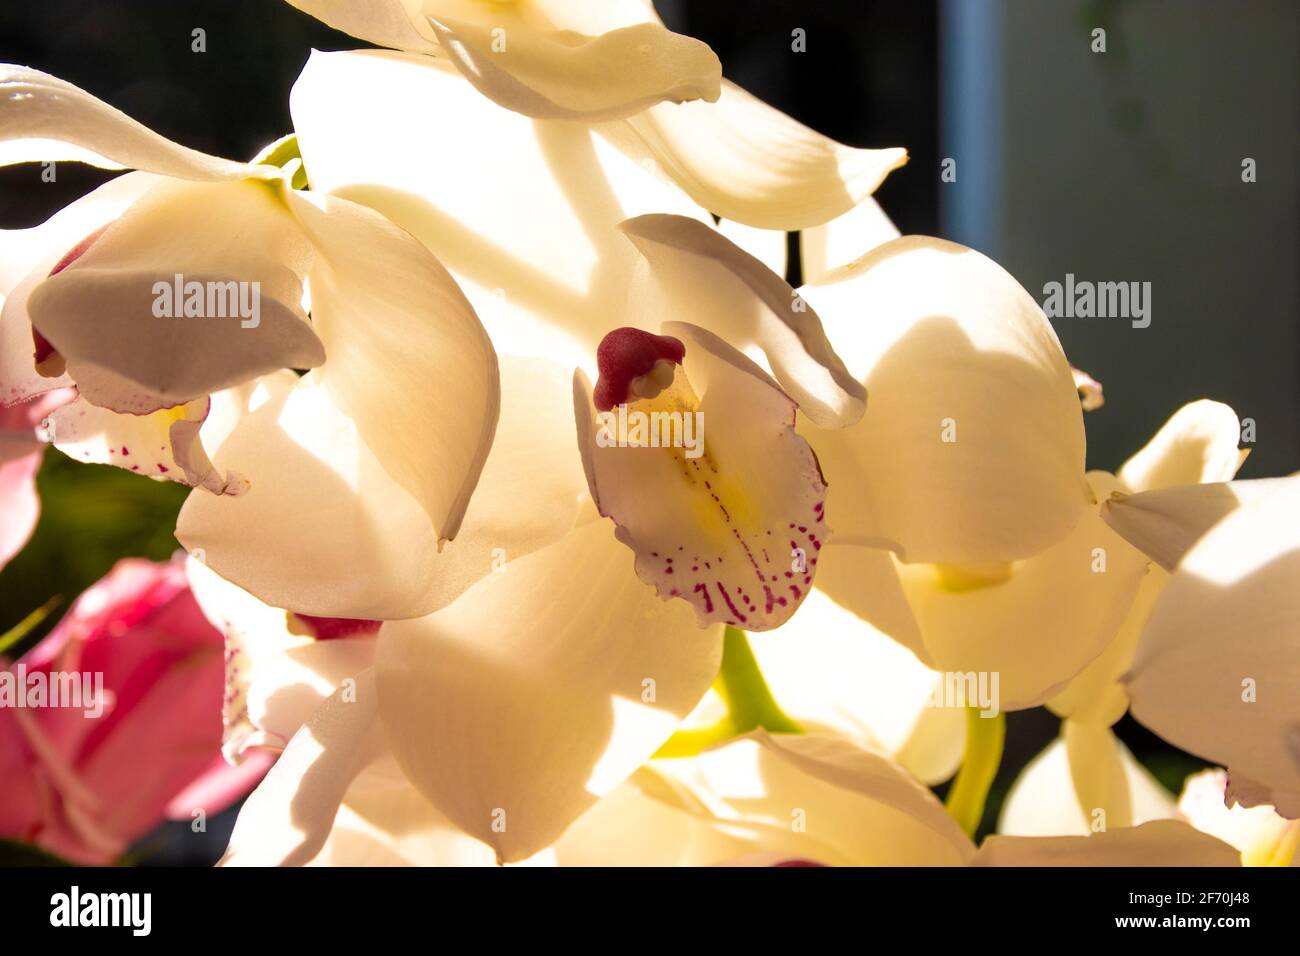 white orchid with a fuchsia and yellow center surrounded by other orchids illuminated by a streak of light Stock Photo